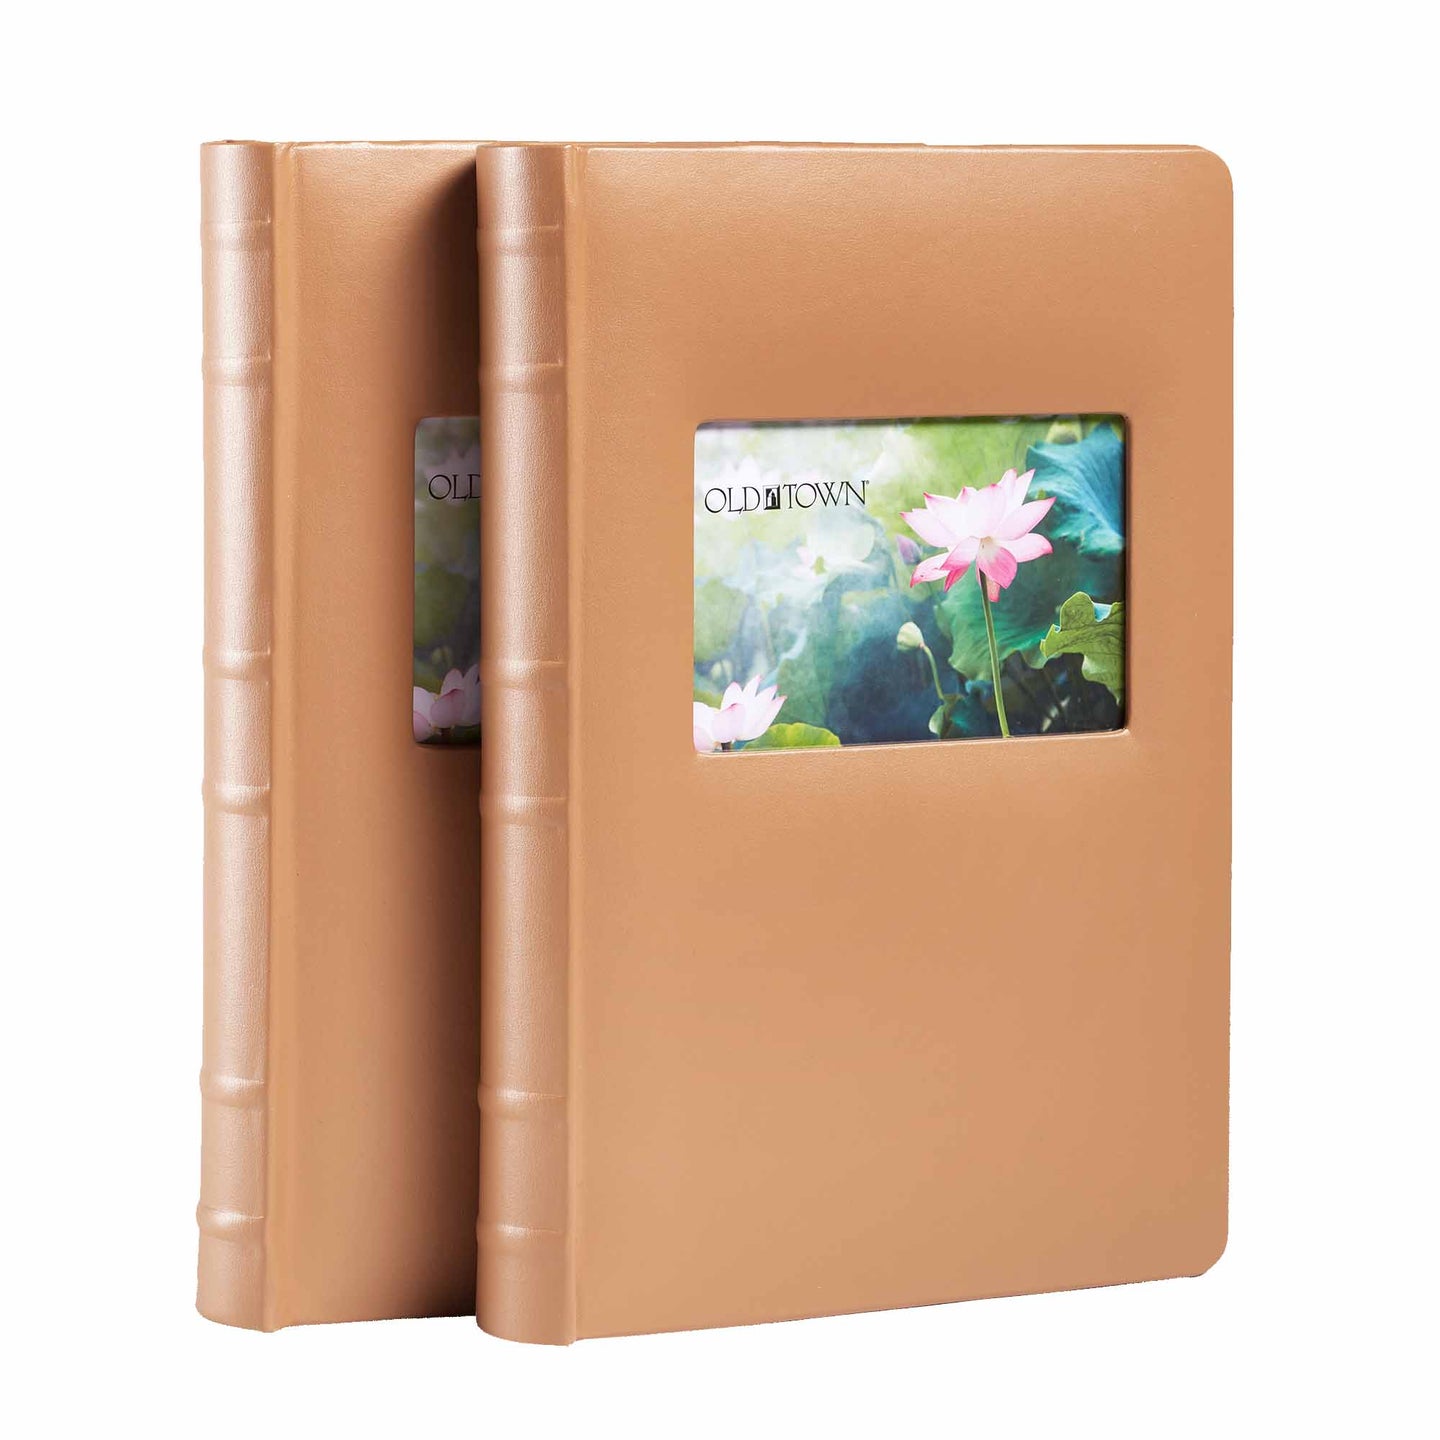 2 pack of caramel leather photo albums with 4x6 inch window for displaying photo.